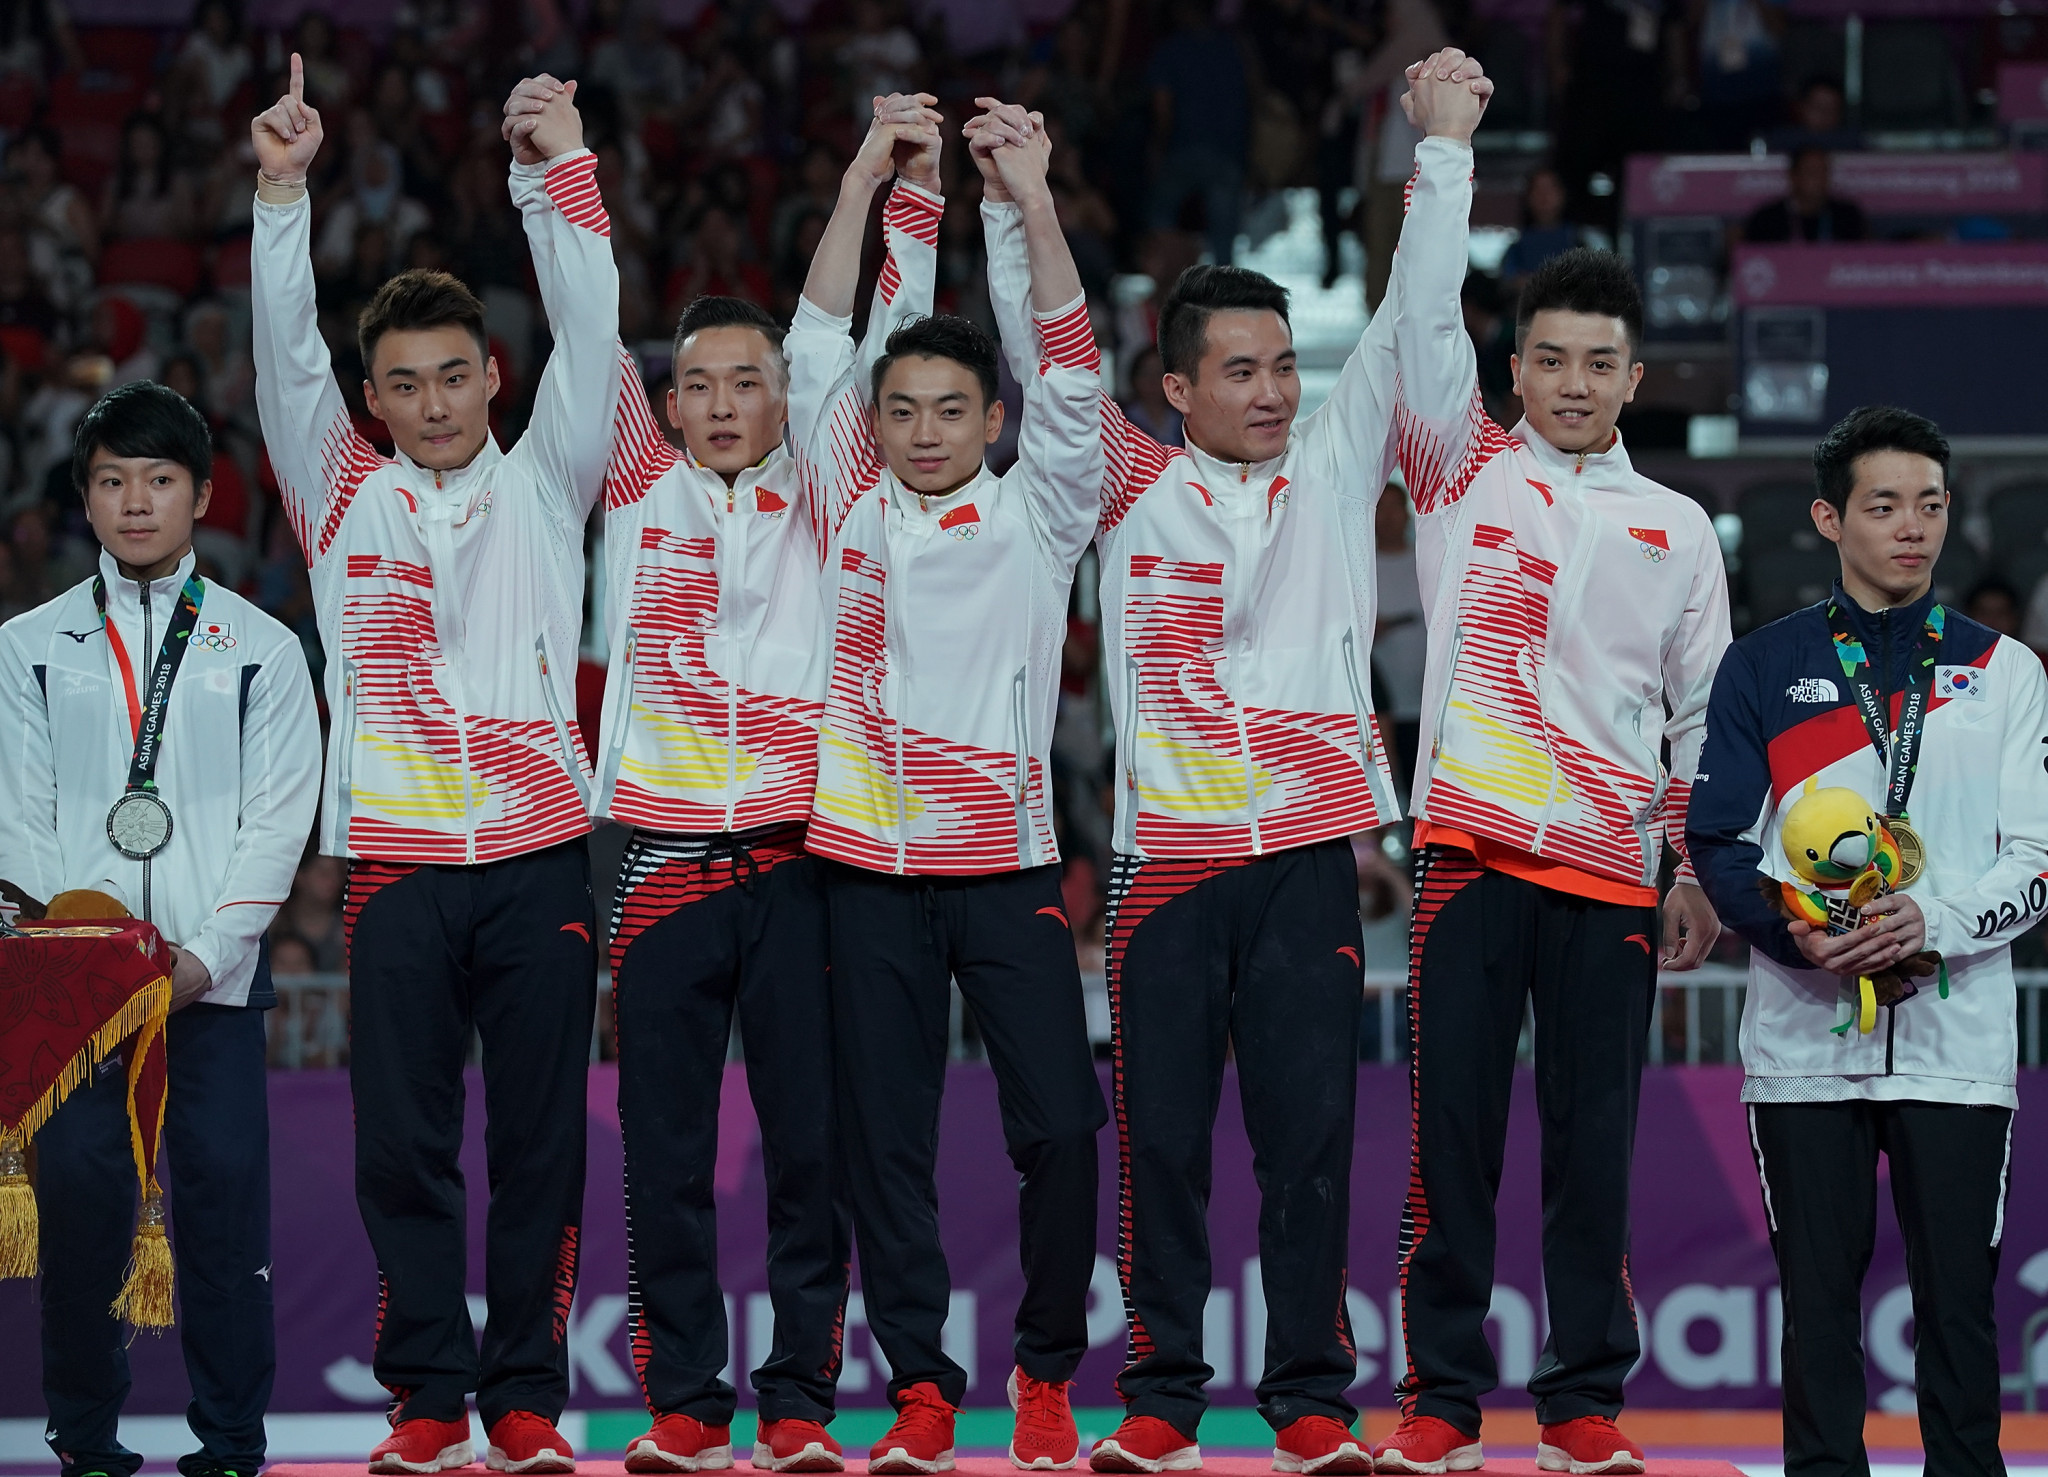 After just four days, China look untouchable at the top of the medal table, with 17 more golds than their closest rivals Japan ©Getty Images